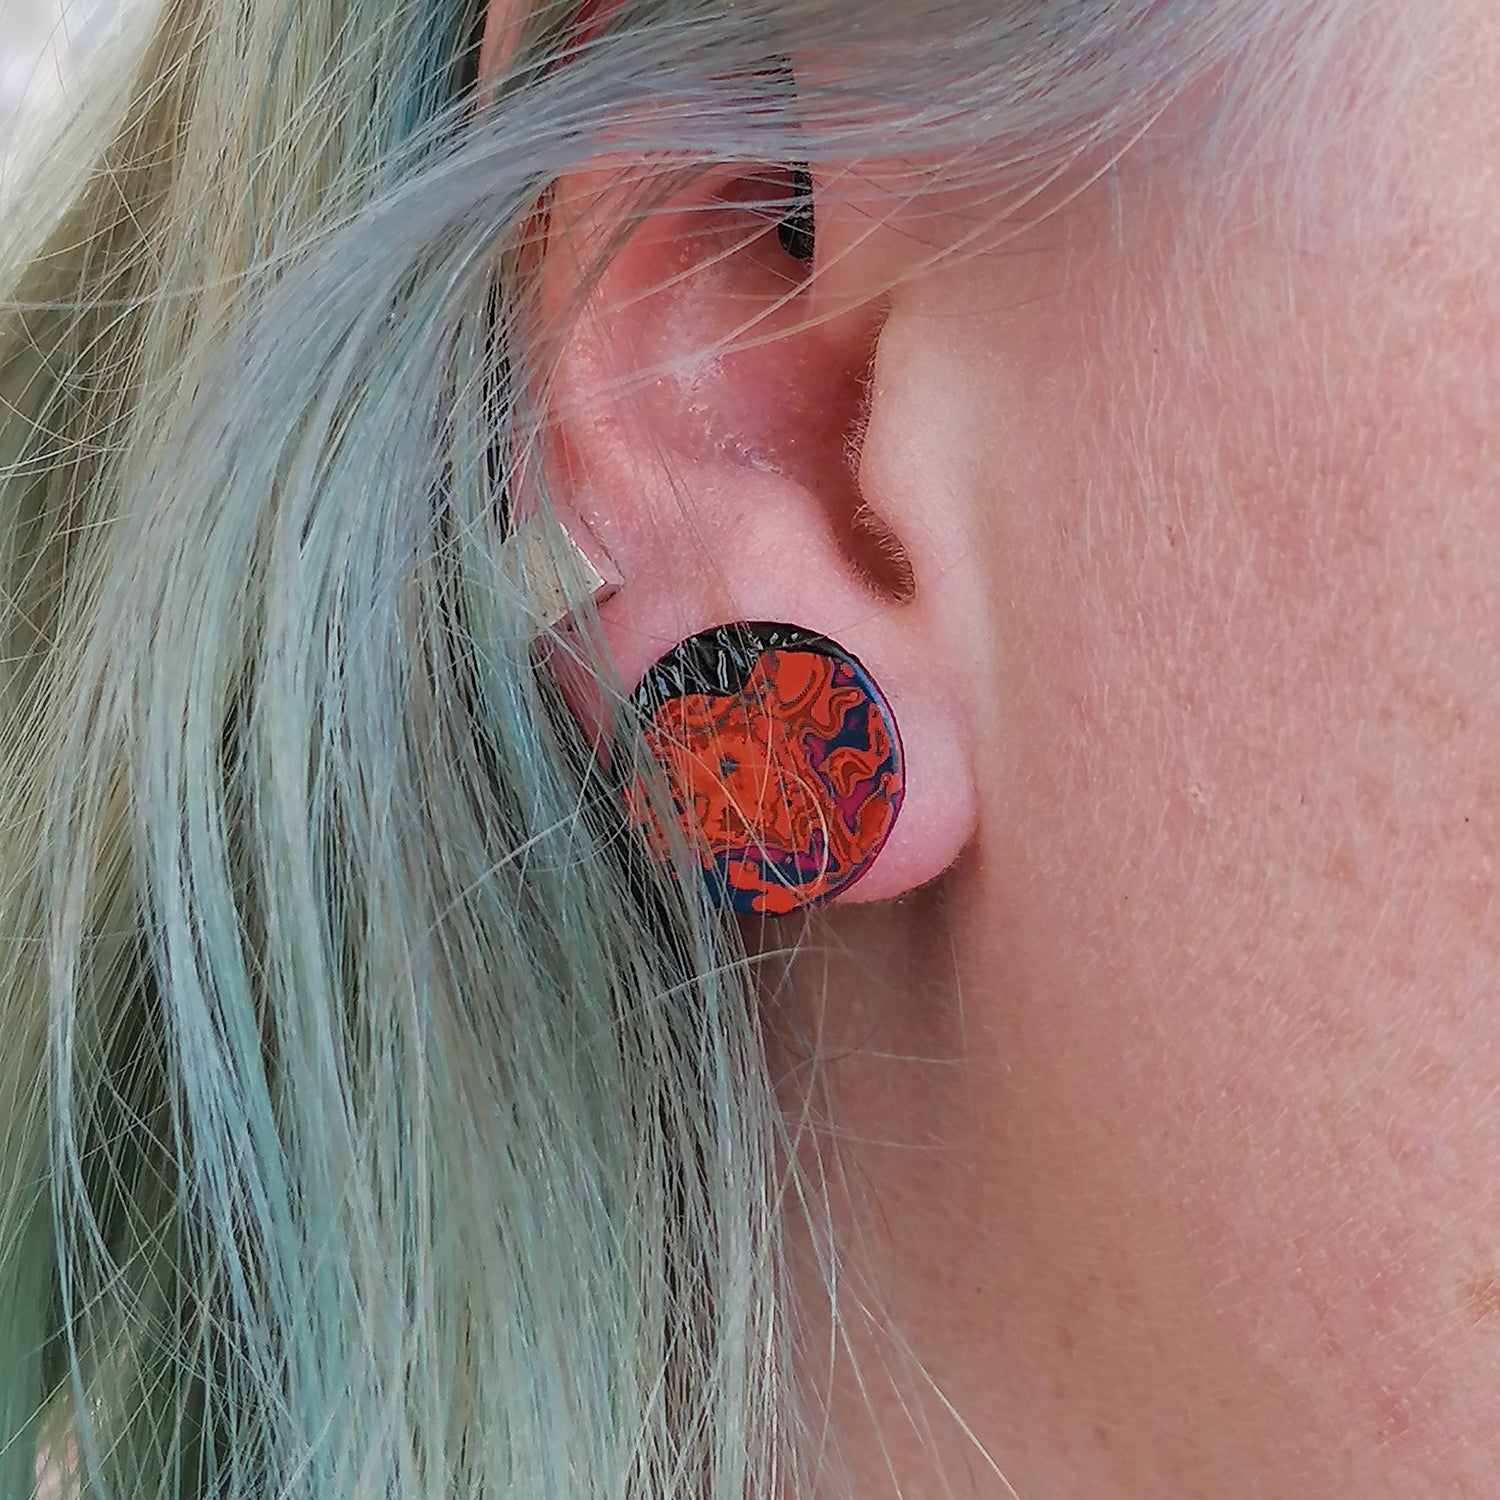 Image shows a single small circle stud earring being worn by a blue haired model. An abstract pattern in pink, orange and blue.